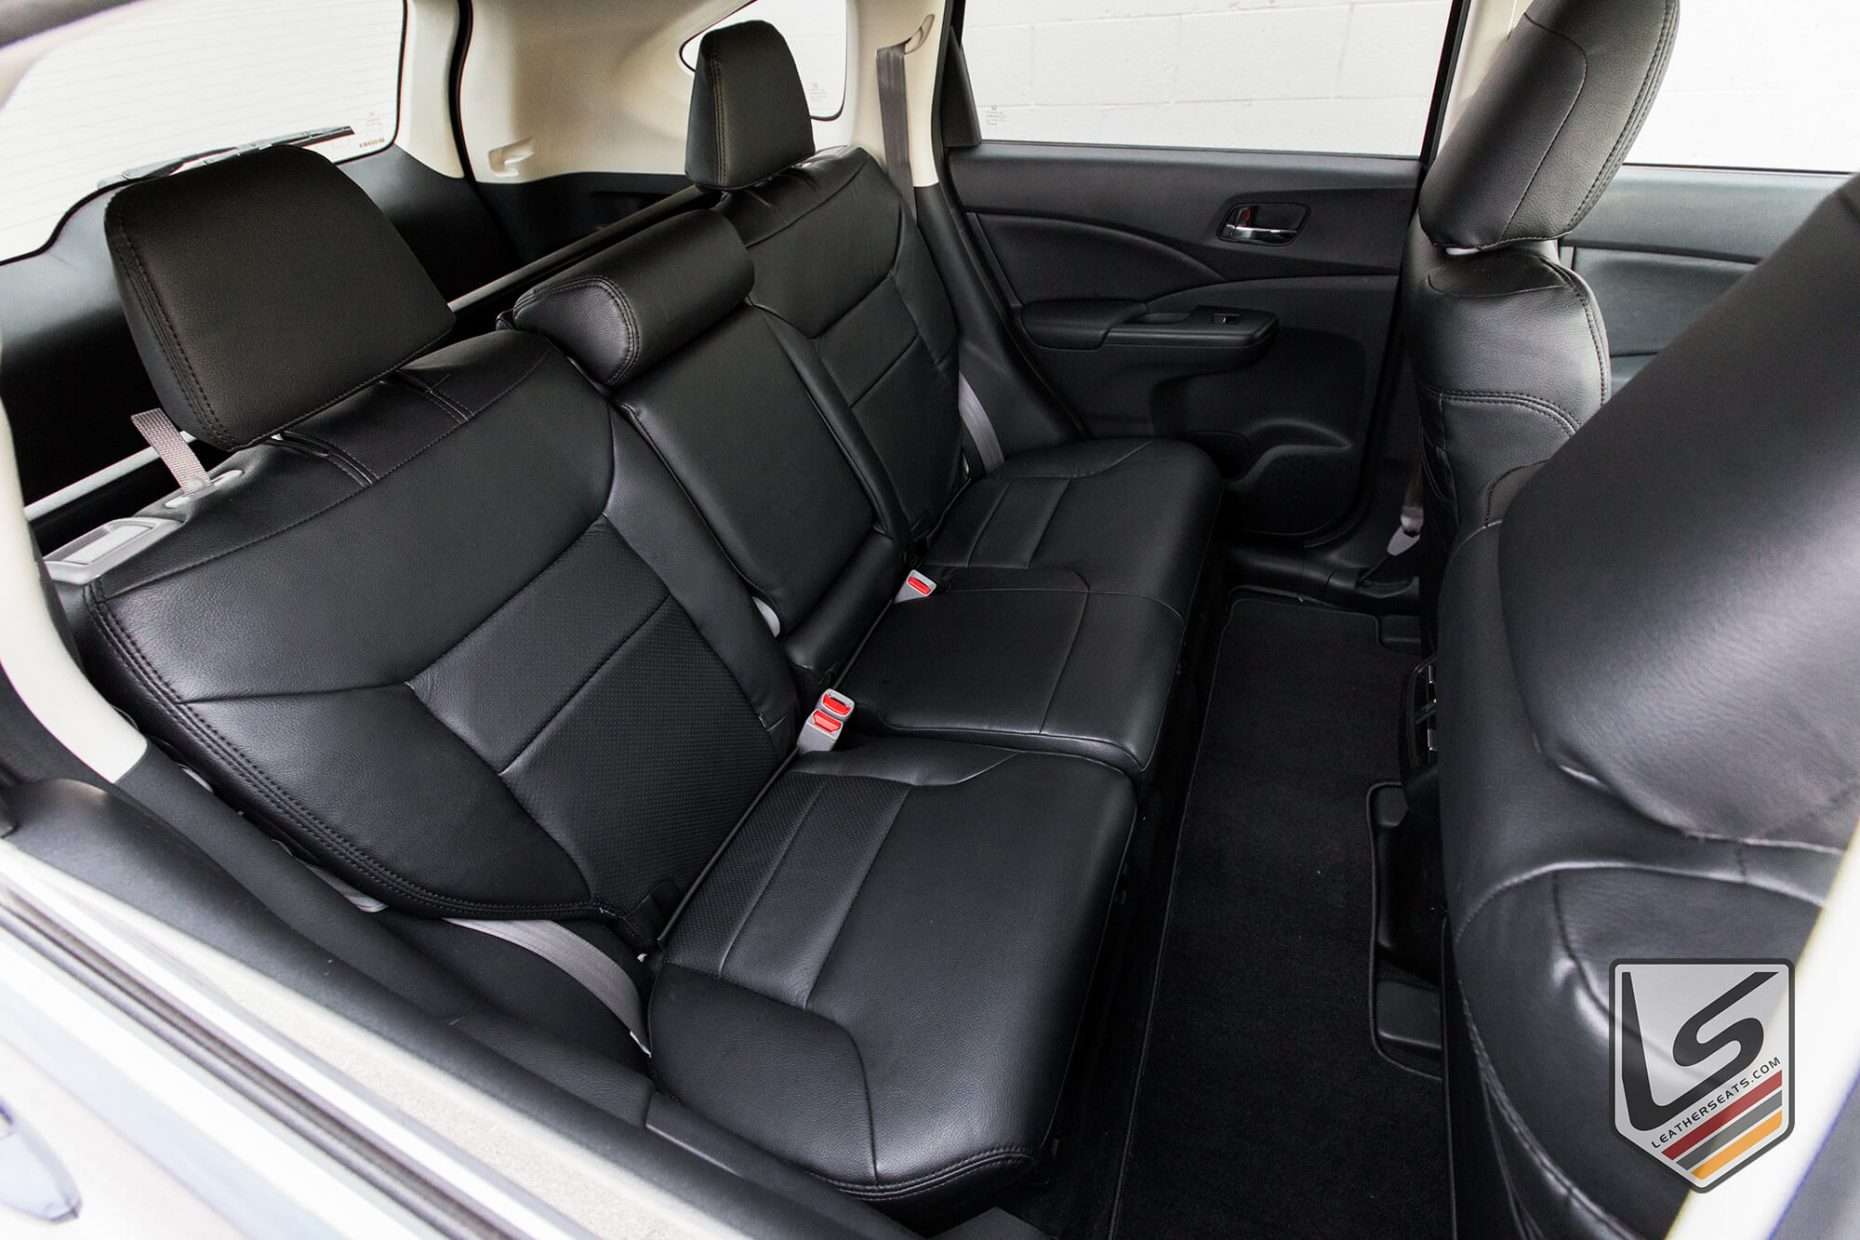 2015 Honda Cr-V with Black leather seats - REar seats from passenger side